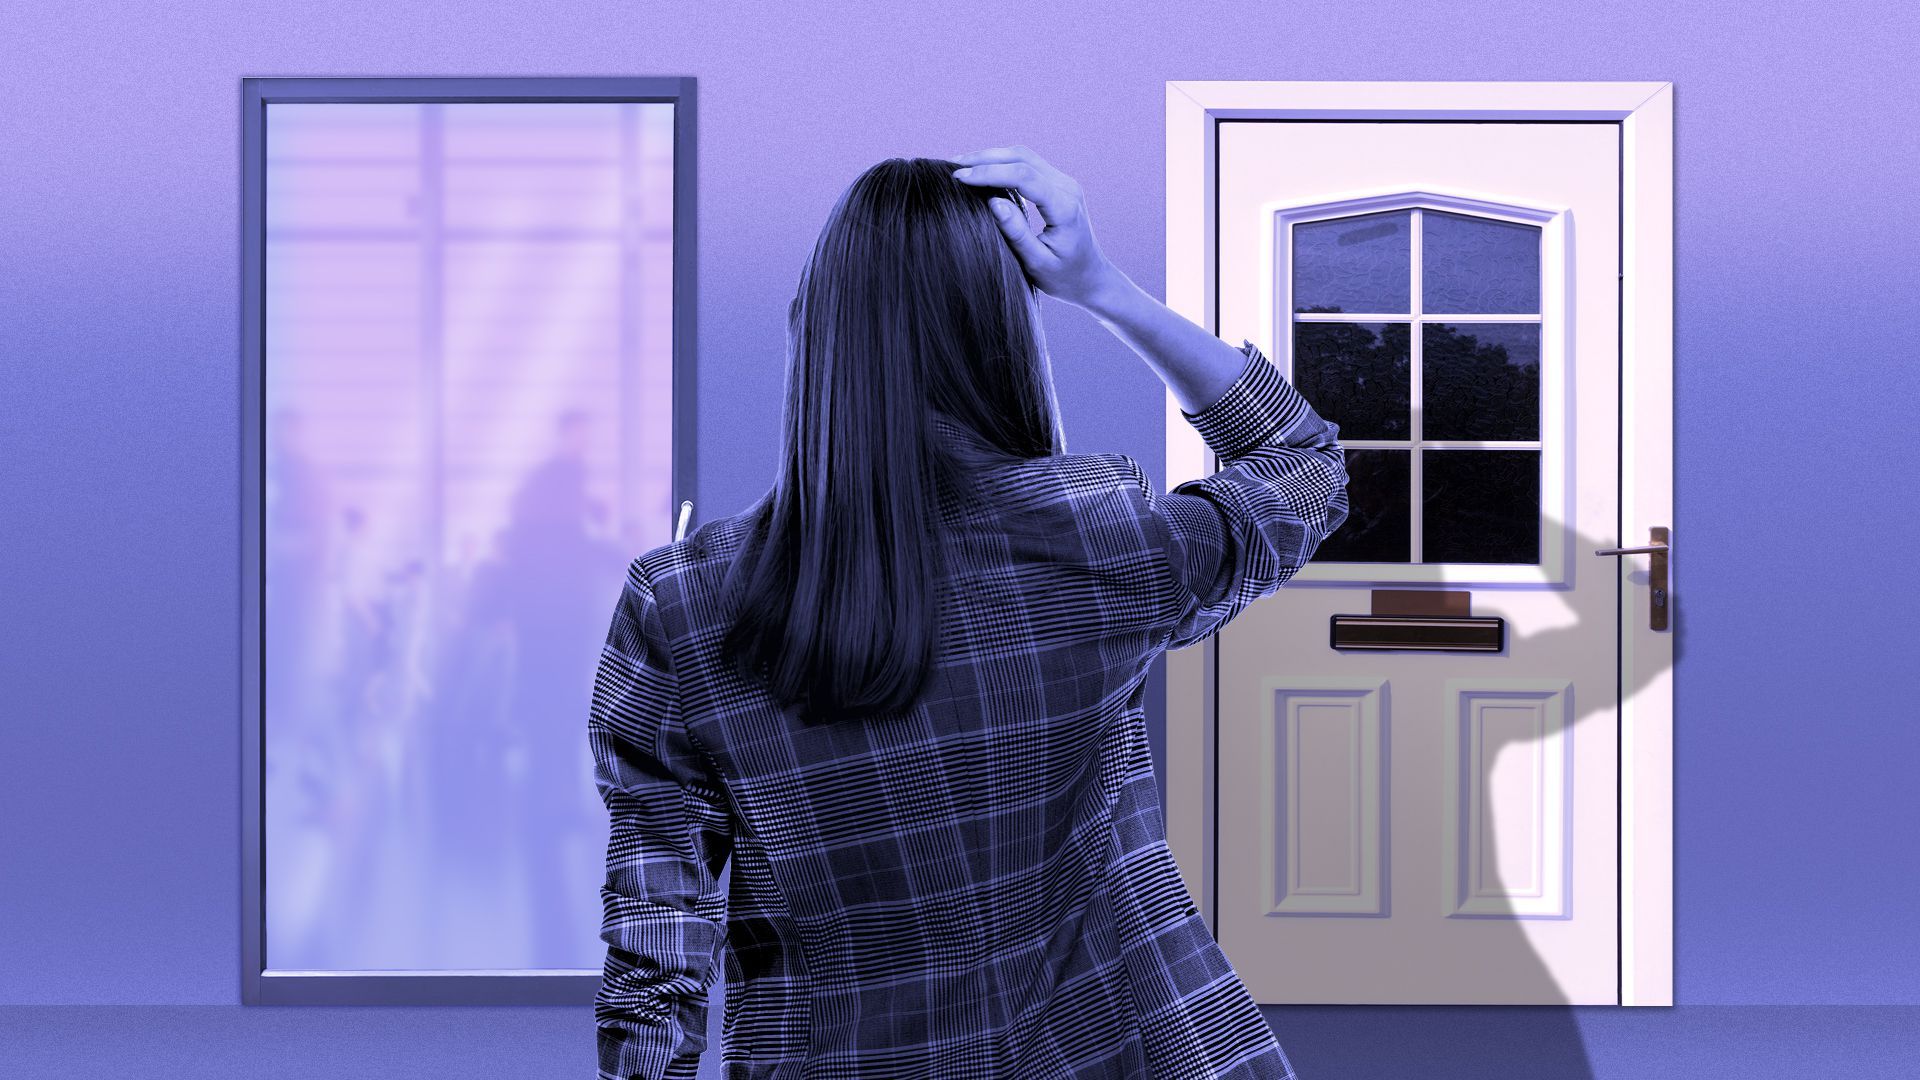 Illustration of a woman facing an office door and a front door to a house